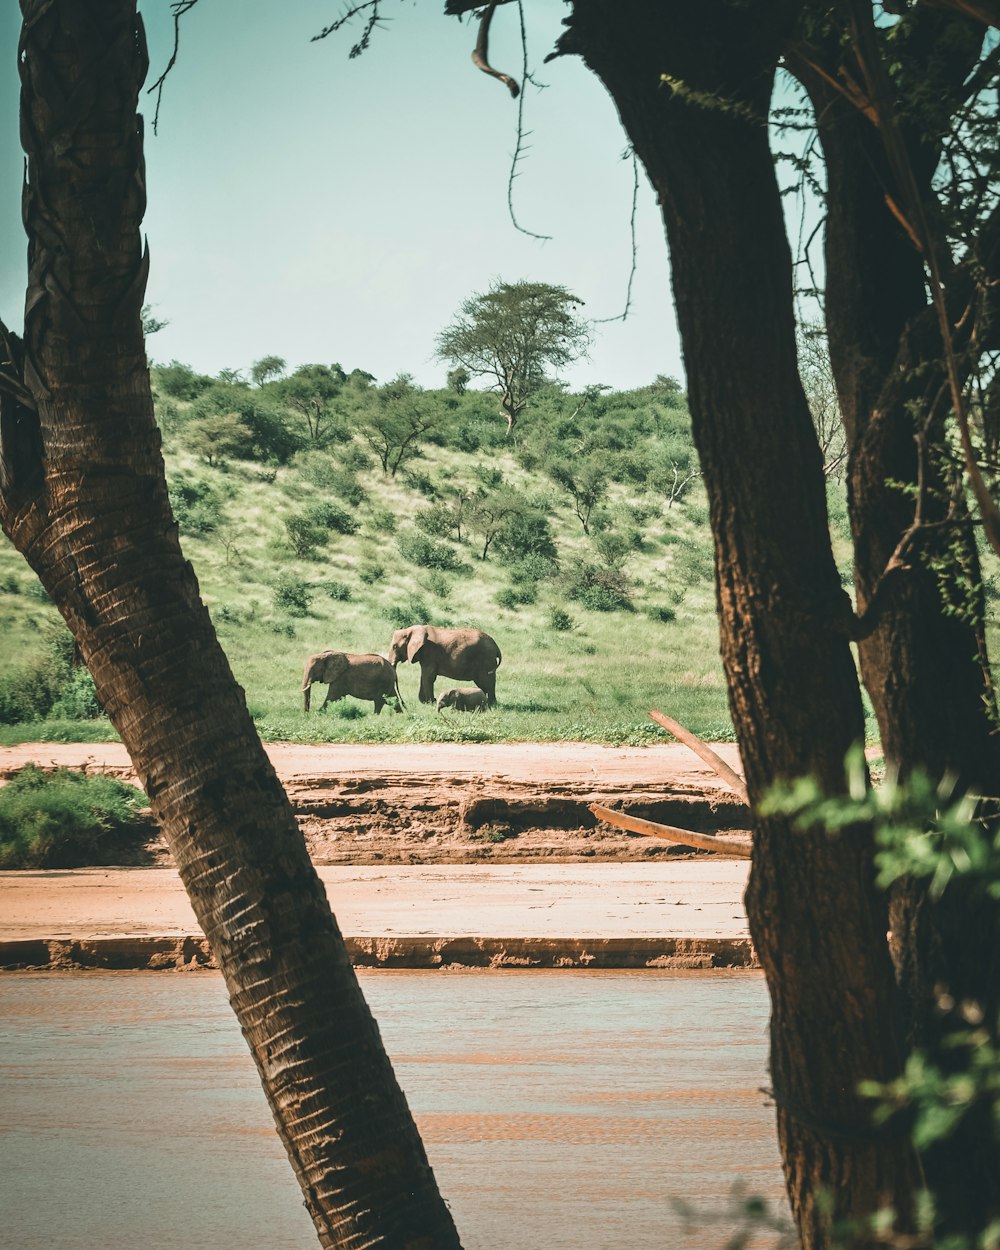 shallow focus photo of two elephants on grass field during daytime